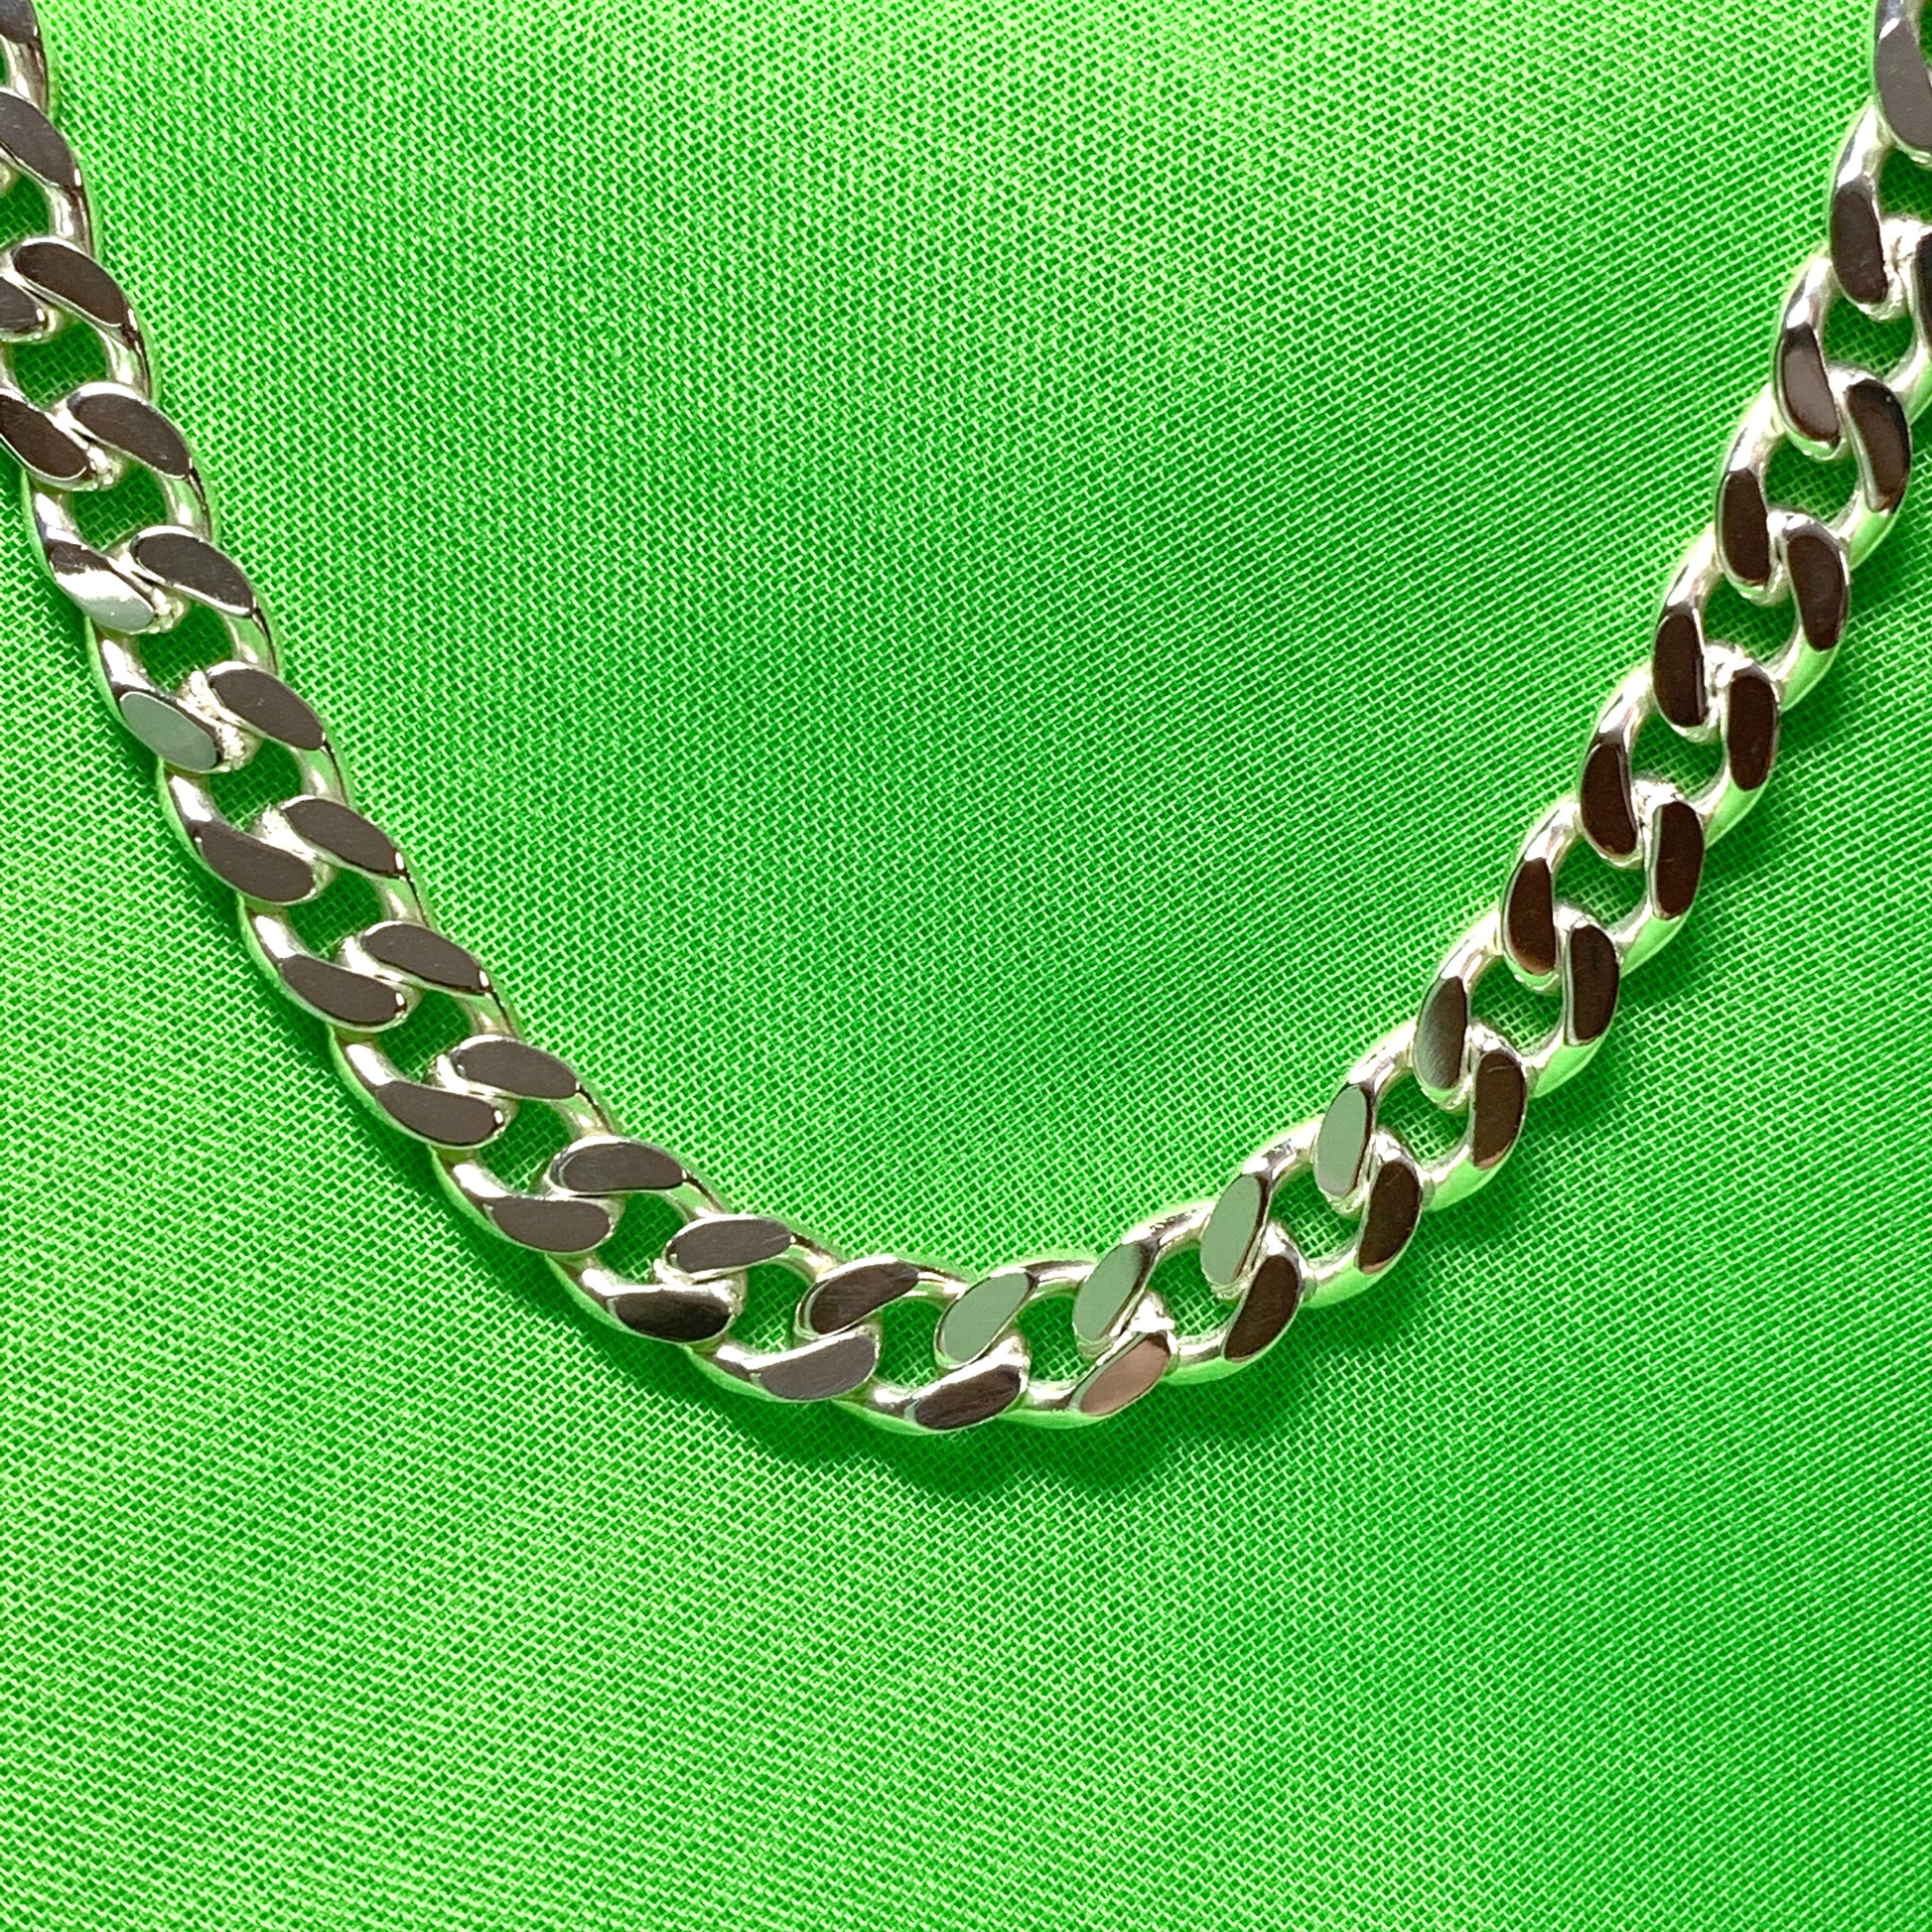 Men's heavy solid sterling silver curb necklace